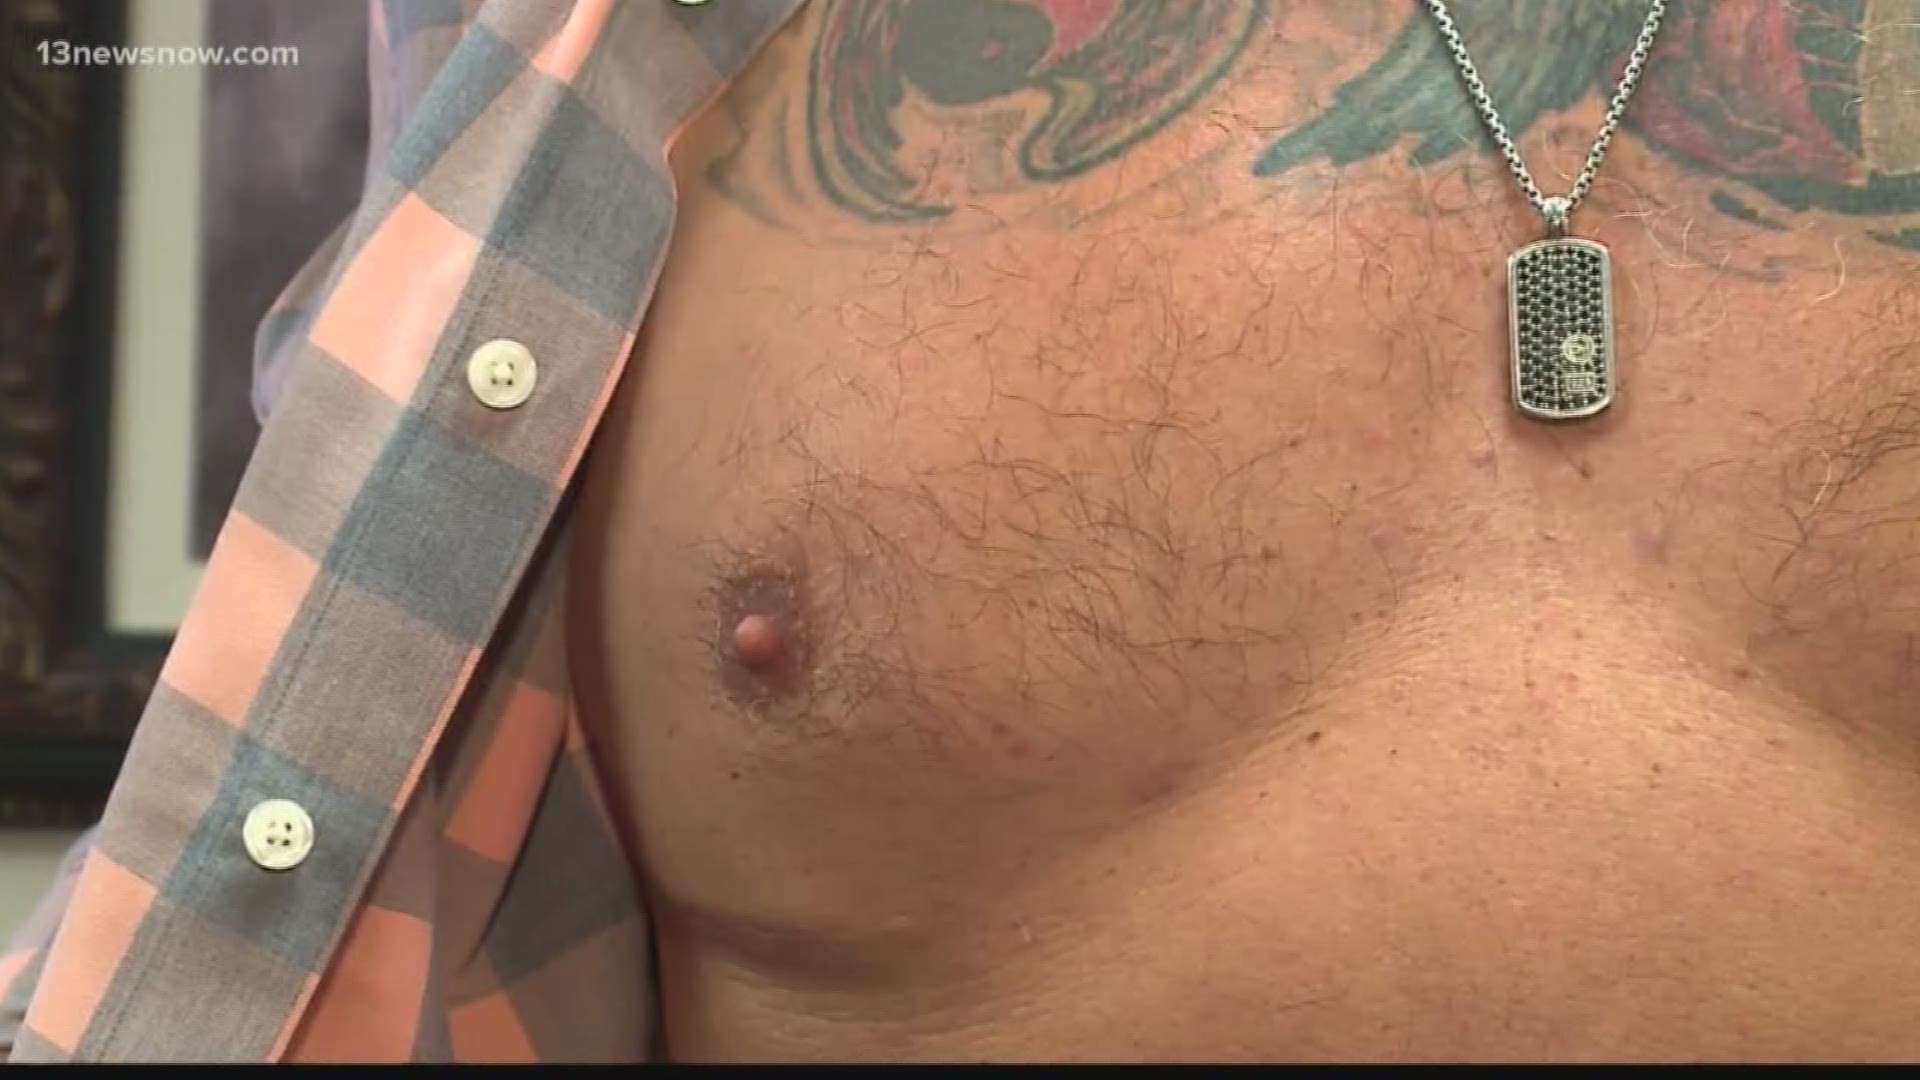 Some men are fighting the 'Dad Bod' with plastic surgery.